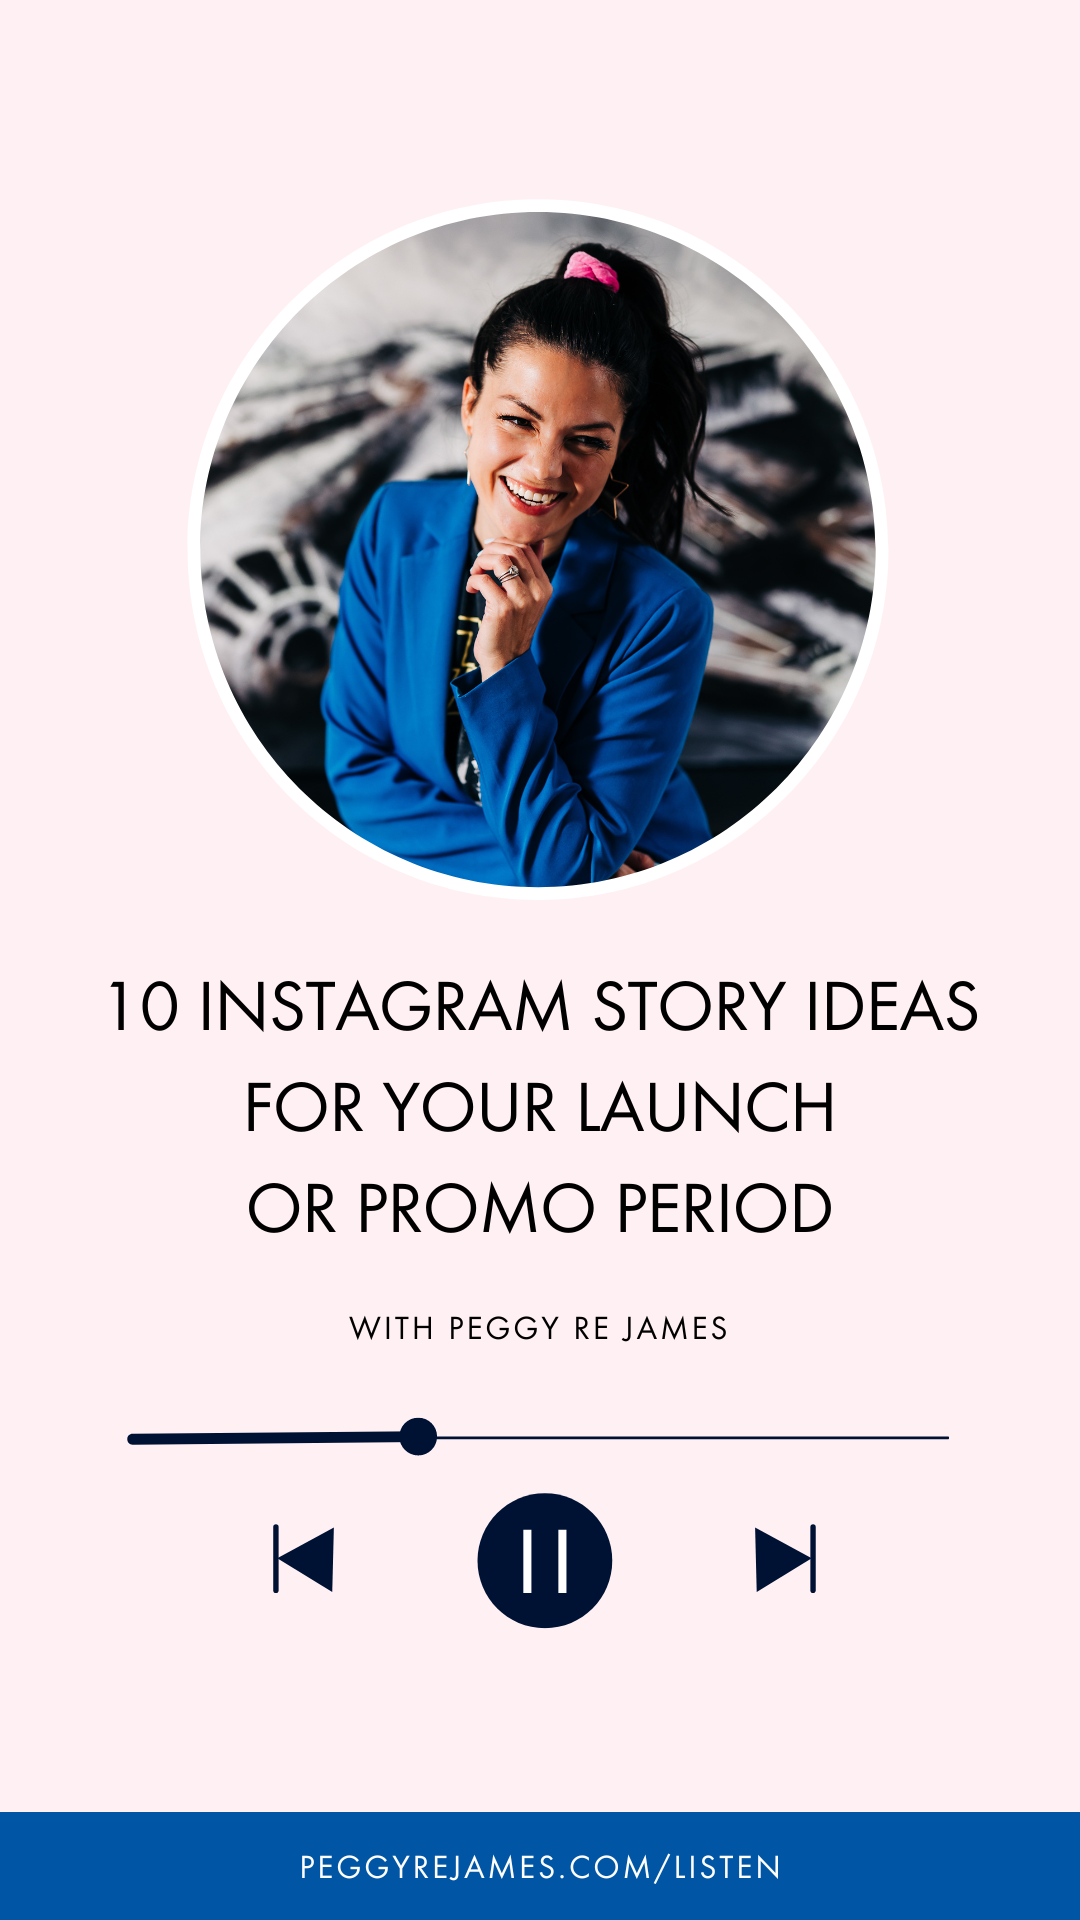 10 Instagram story ideas for your launch or promo period